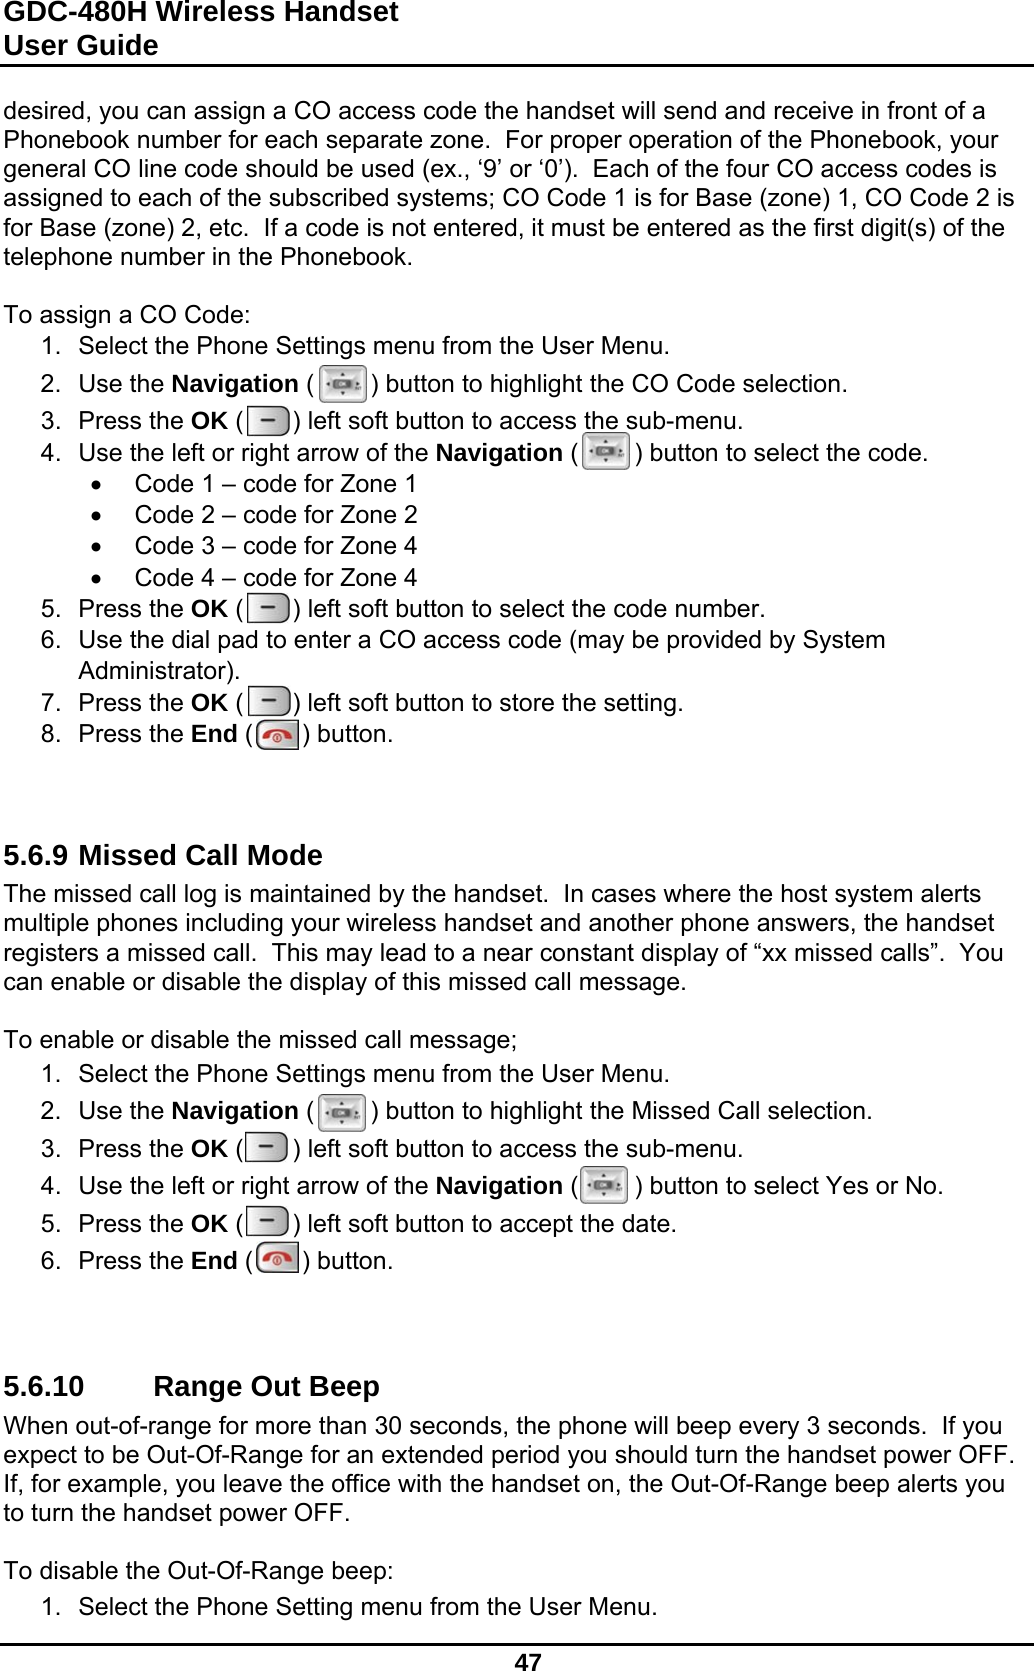 GDC-480H Wireless Handset User Guide   47  desired, you can assign a CO access code the handset will send and receive in front of a Phonebook number for each separate zone.  For proper operation of the Phonebook, your general CO line code should be used (ex., ‘9’ or ‘0’).  Each of the four CO access codes is assigned to each of the subscribed systems; CO Code 1 is for Base (zone) 1, CO Code 2 is for Base (zone) 2, etc.  If a code is not entered, it must be entered as the first digit(s) of the telephone number in the Phonebook.  To assign a CO Code: 1.  Select the Phone Settings menu from the User Menu. 2. Use the Navigation (        ) button to highlight the CO Code selection. 3. Press the OK (       ) left soft button to access the sub-menu. 4.  Use the left or right arrow of the Navigation (        ) button to select the code.   Code 1 – code for Zone 1   Code 2 – code for Zone 2   Code 3 – code for Zone 4   Code 4 – code for Zone 4 5. Press the OK (       ) left soft button to select the code number. 6.  Use the dial pad to enter a CO access code (may be provided by System Administrator). 7. Press the OK (       ) left soft button to store the setting. 8. Press the End (       ) button.    5.6.9 Missed Call Mode The missed call log is maintained by the handset.  In cases where the host system alerts multiple phones including your wireless handset and another phone answers, the handset registers a missed call.  This may lead to a near constant display of “xx missed calls”.  You can enable or disable the display of this missed call message.  To enable or disable the missed call message; 1.  Select the Phone Settings menu from the User Menu. 2. Use the Navigation (        ) button to highlight the Missed Call selection. 3. Press the OK (       ) left soft button to access the sub-menu. 4.  Use the left or right arrow of the Navigation (        ) button to select Yes or No. 5. Press the OK (       ) left soft button to accept the date. 6. Press the End (       ) button.    5.6.10  Range Out Beep When out-of-range for more than 30 seconds, the phone will beep every 3 seconds.  If you expect to be Out-Of-Range for an extended period you should turn the handset power OFF.  If, for example, you leave the office with the handset on, the Out-Of-Range beep alerts you to turn the handset power OFF.  To disable the Out-Of-Range beep: 1.  Select the Phone Setting menu from the User Menu. 